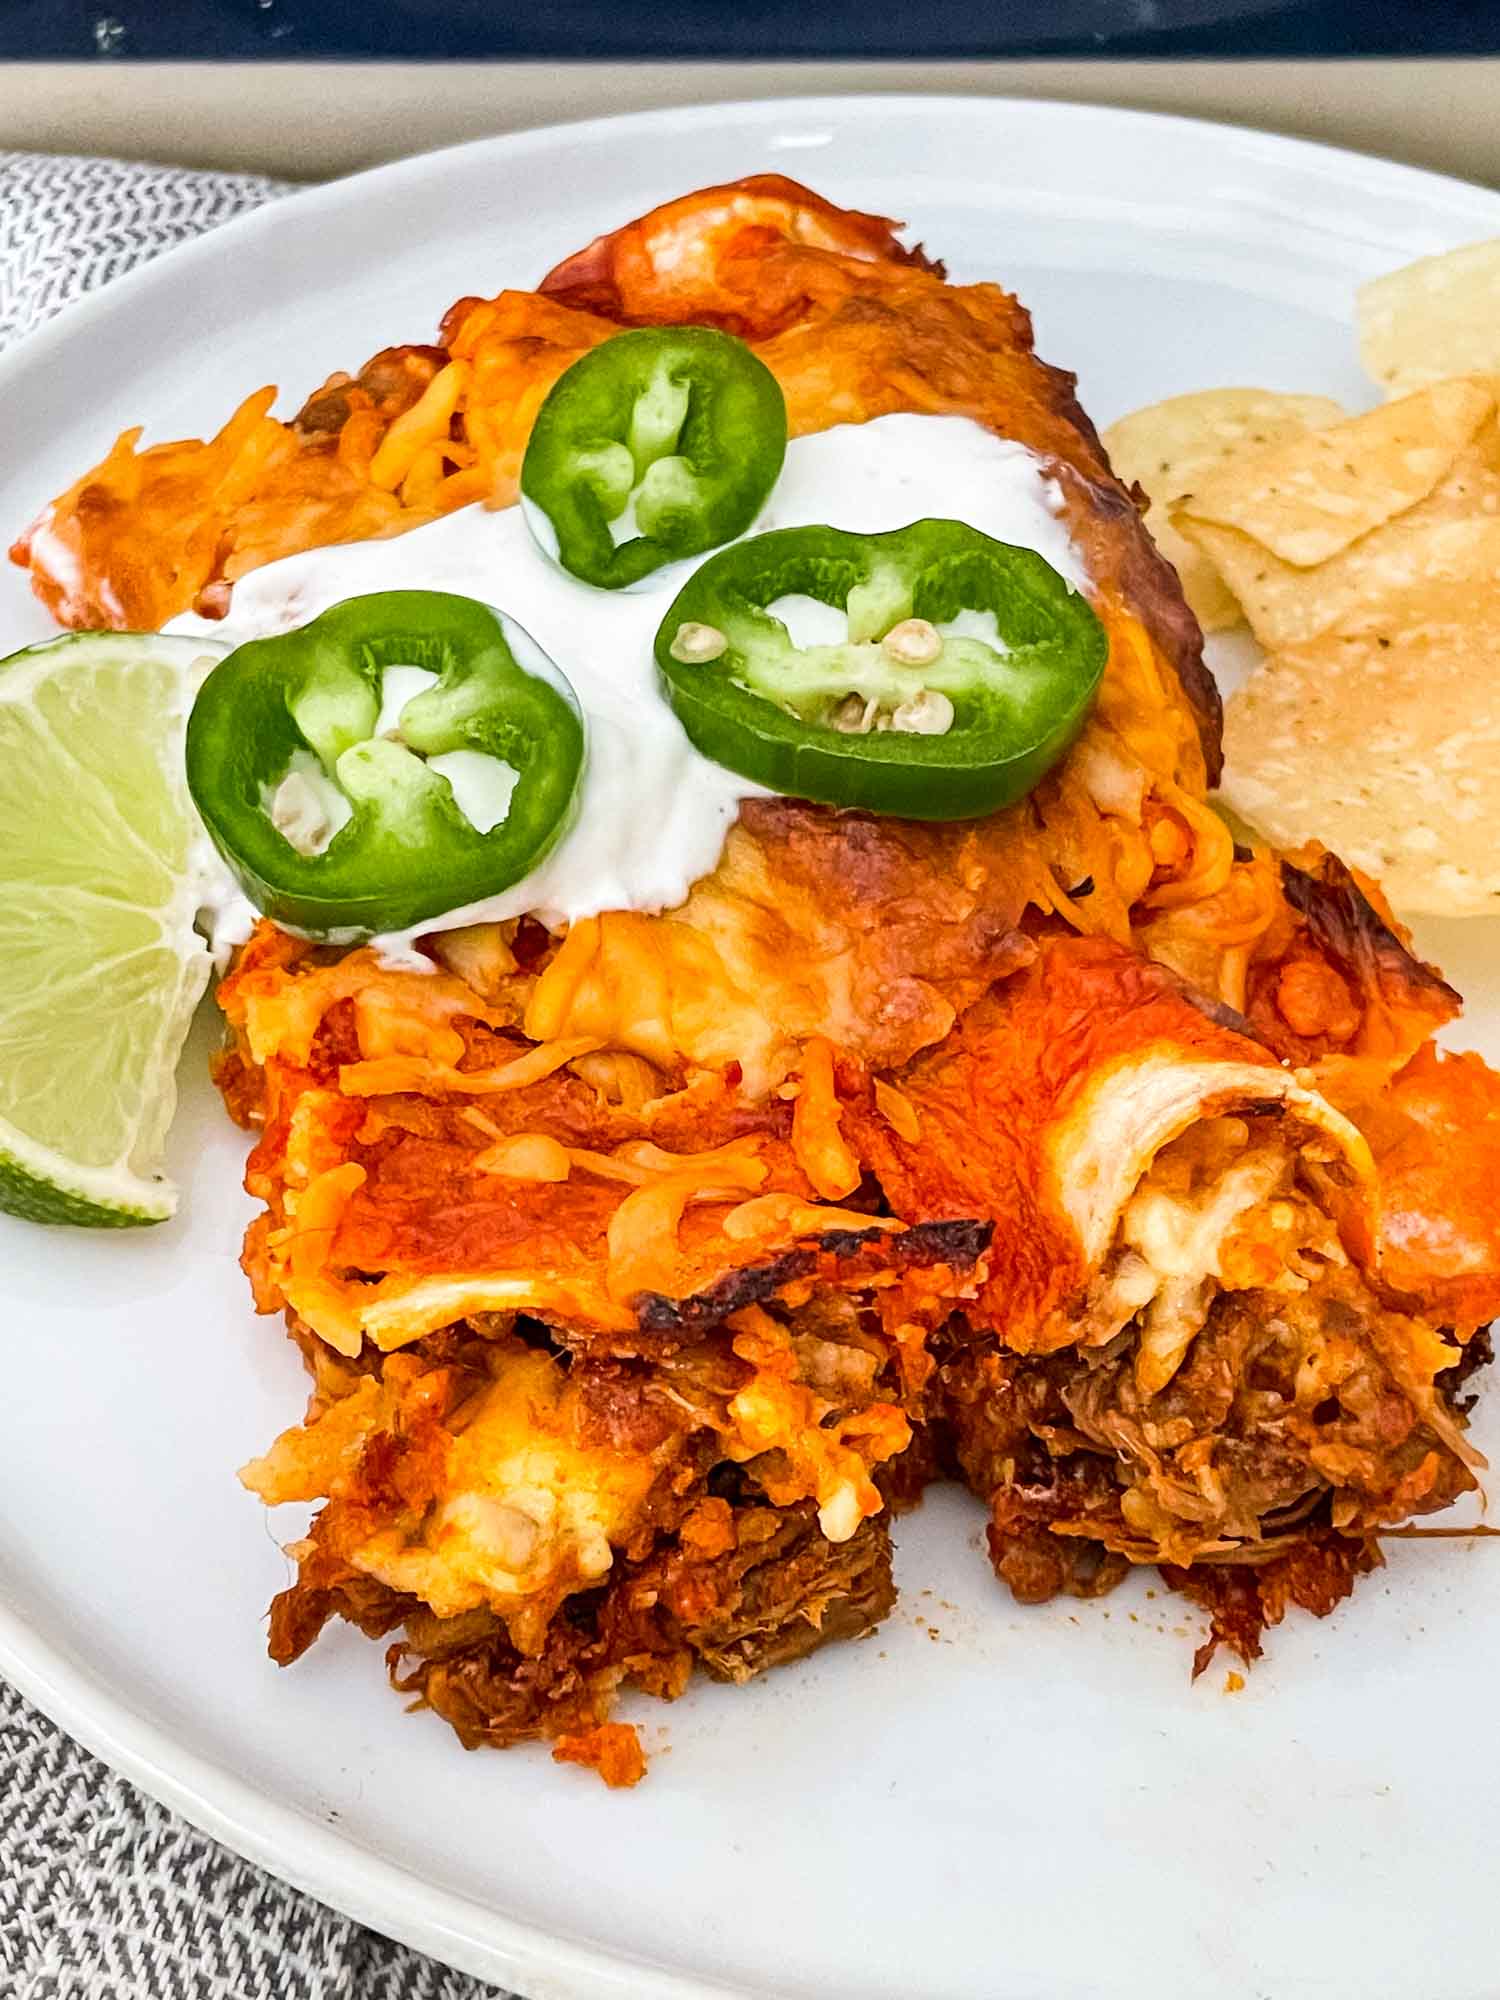 Two Shredded Beef Enchiladas on a plate with sour cream and jalapenos on top